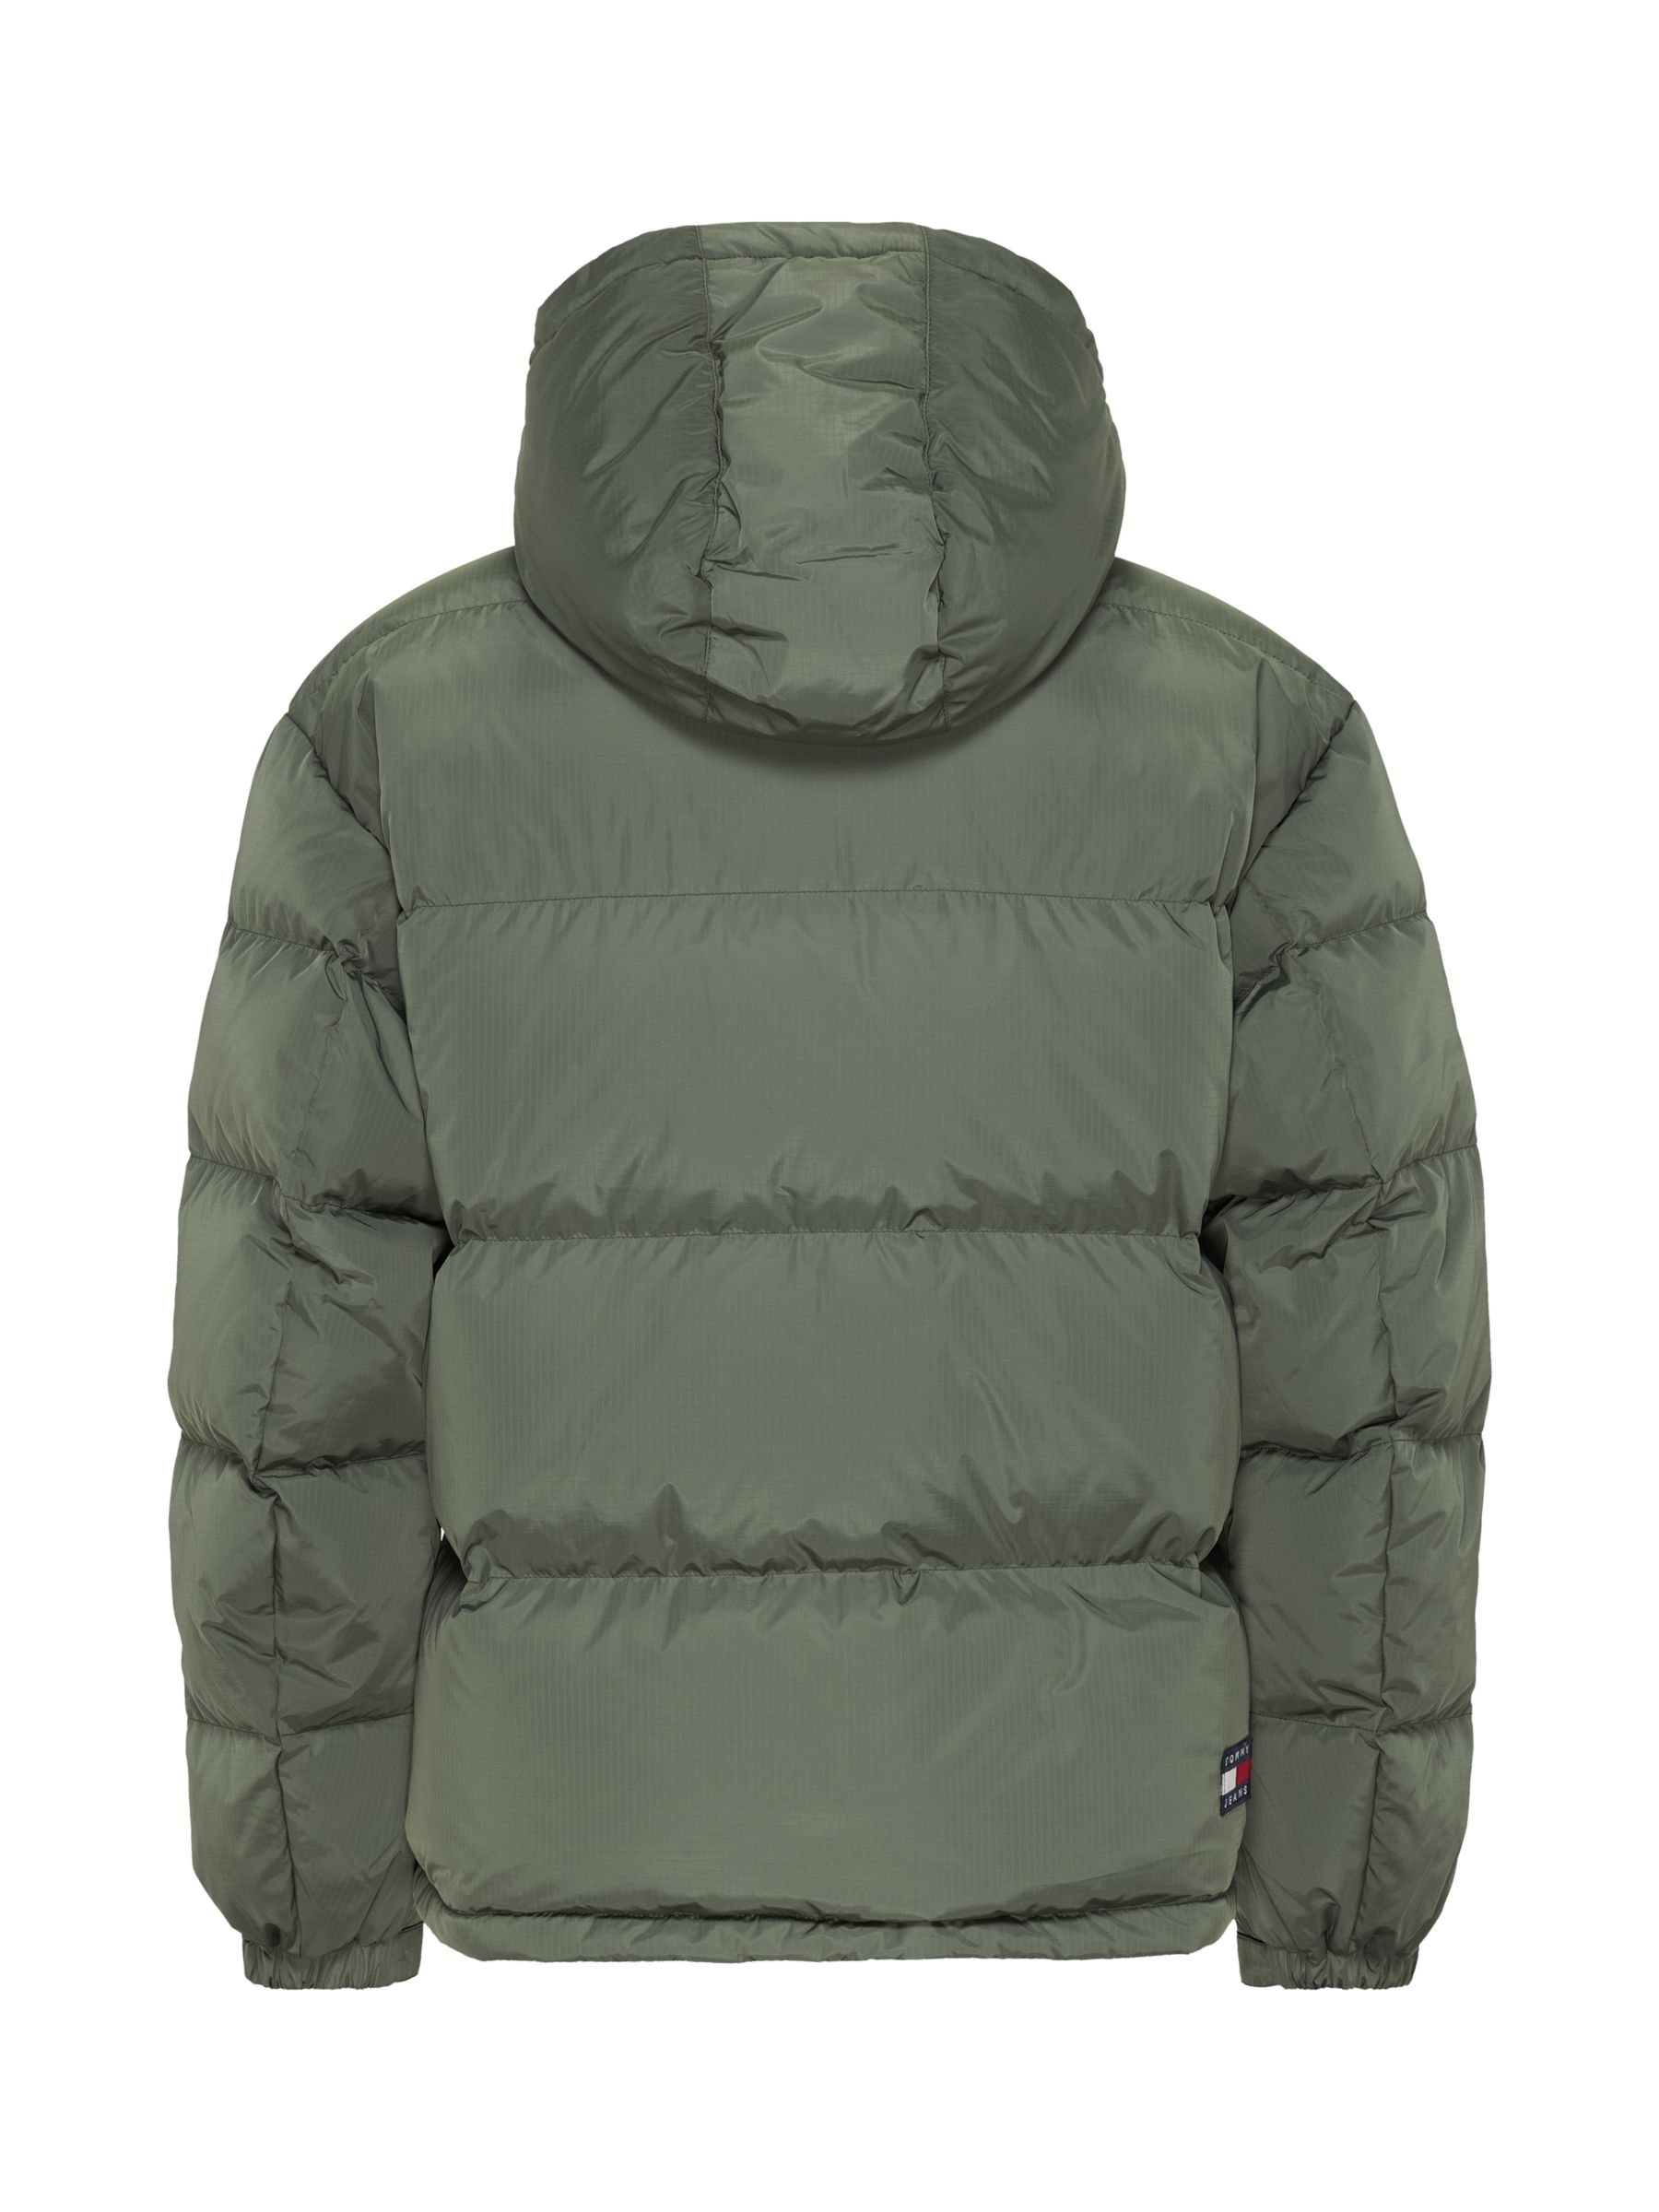 Tommy Hilfiger Alaska Recycled Puffer Jacket at John Lewis & Partners